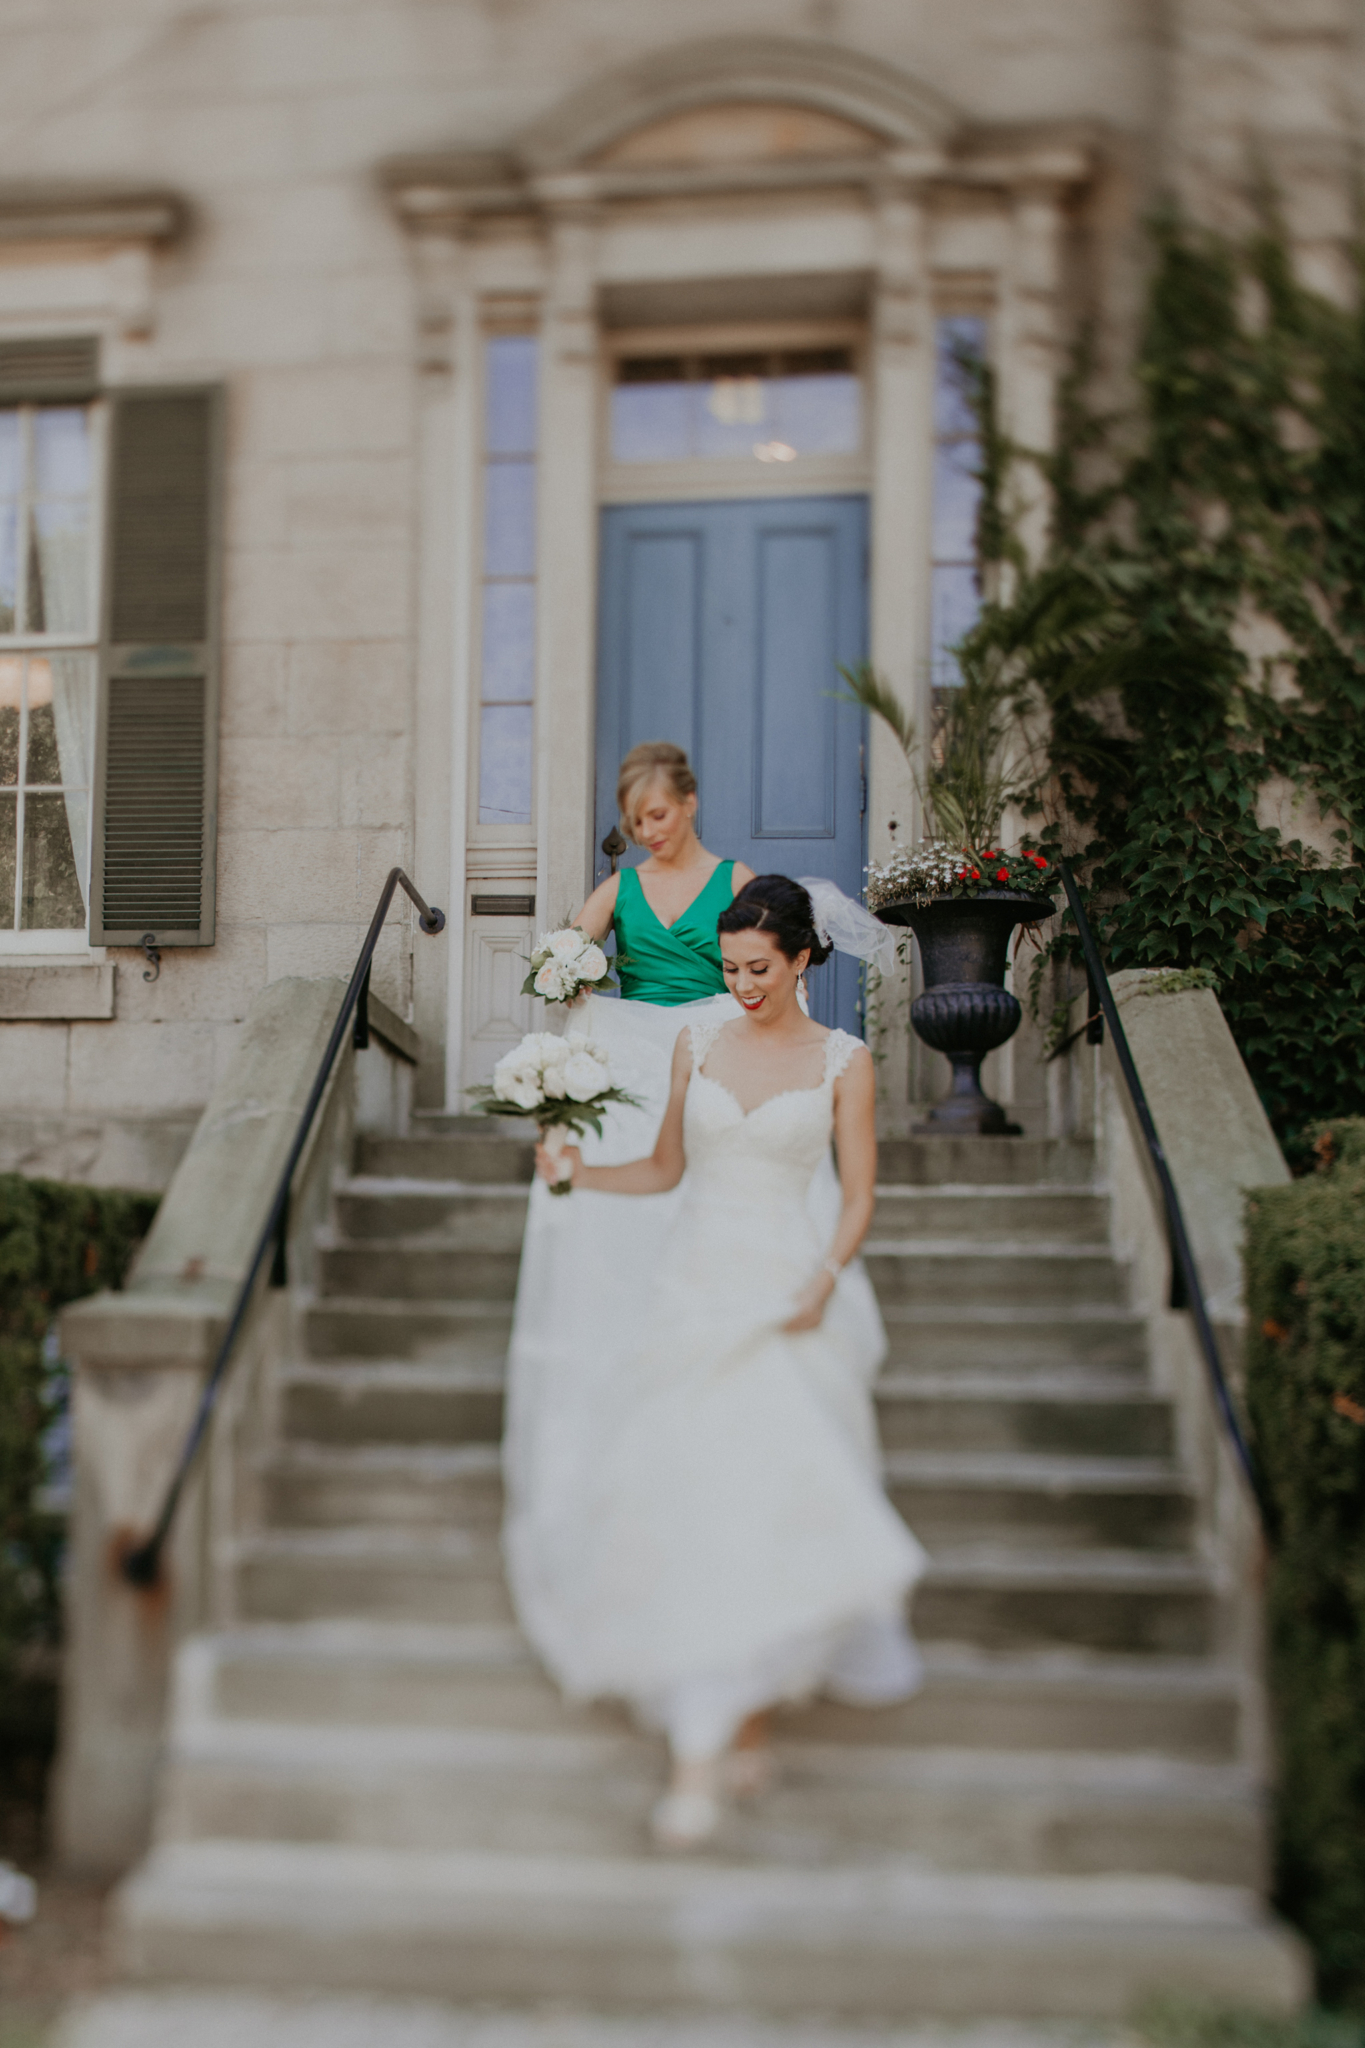 Bride walking down steps with bridesmaid on wedding day